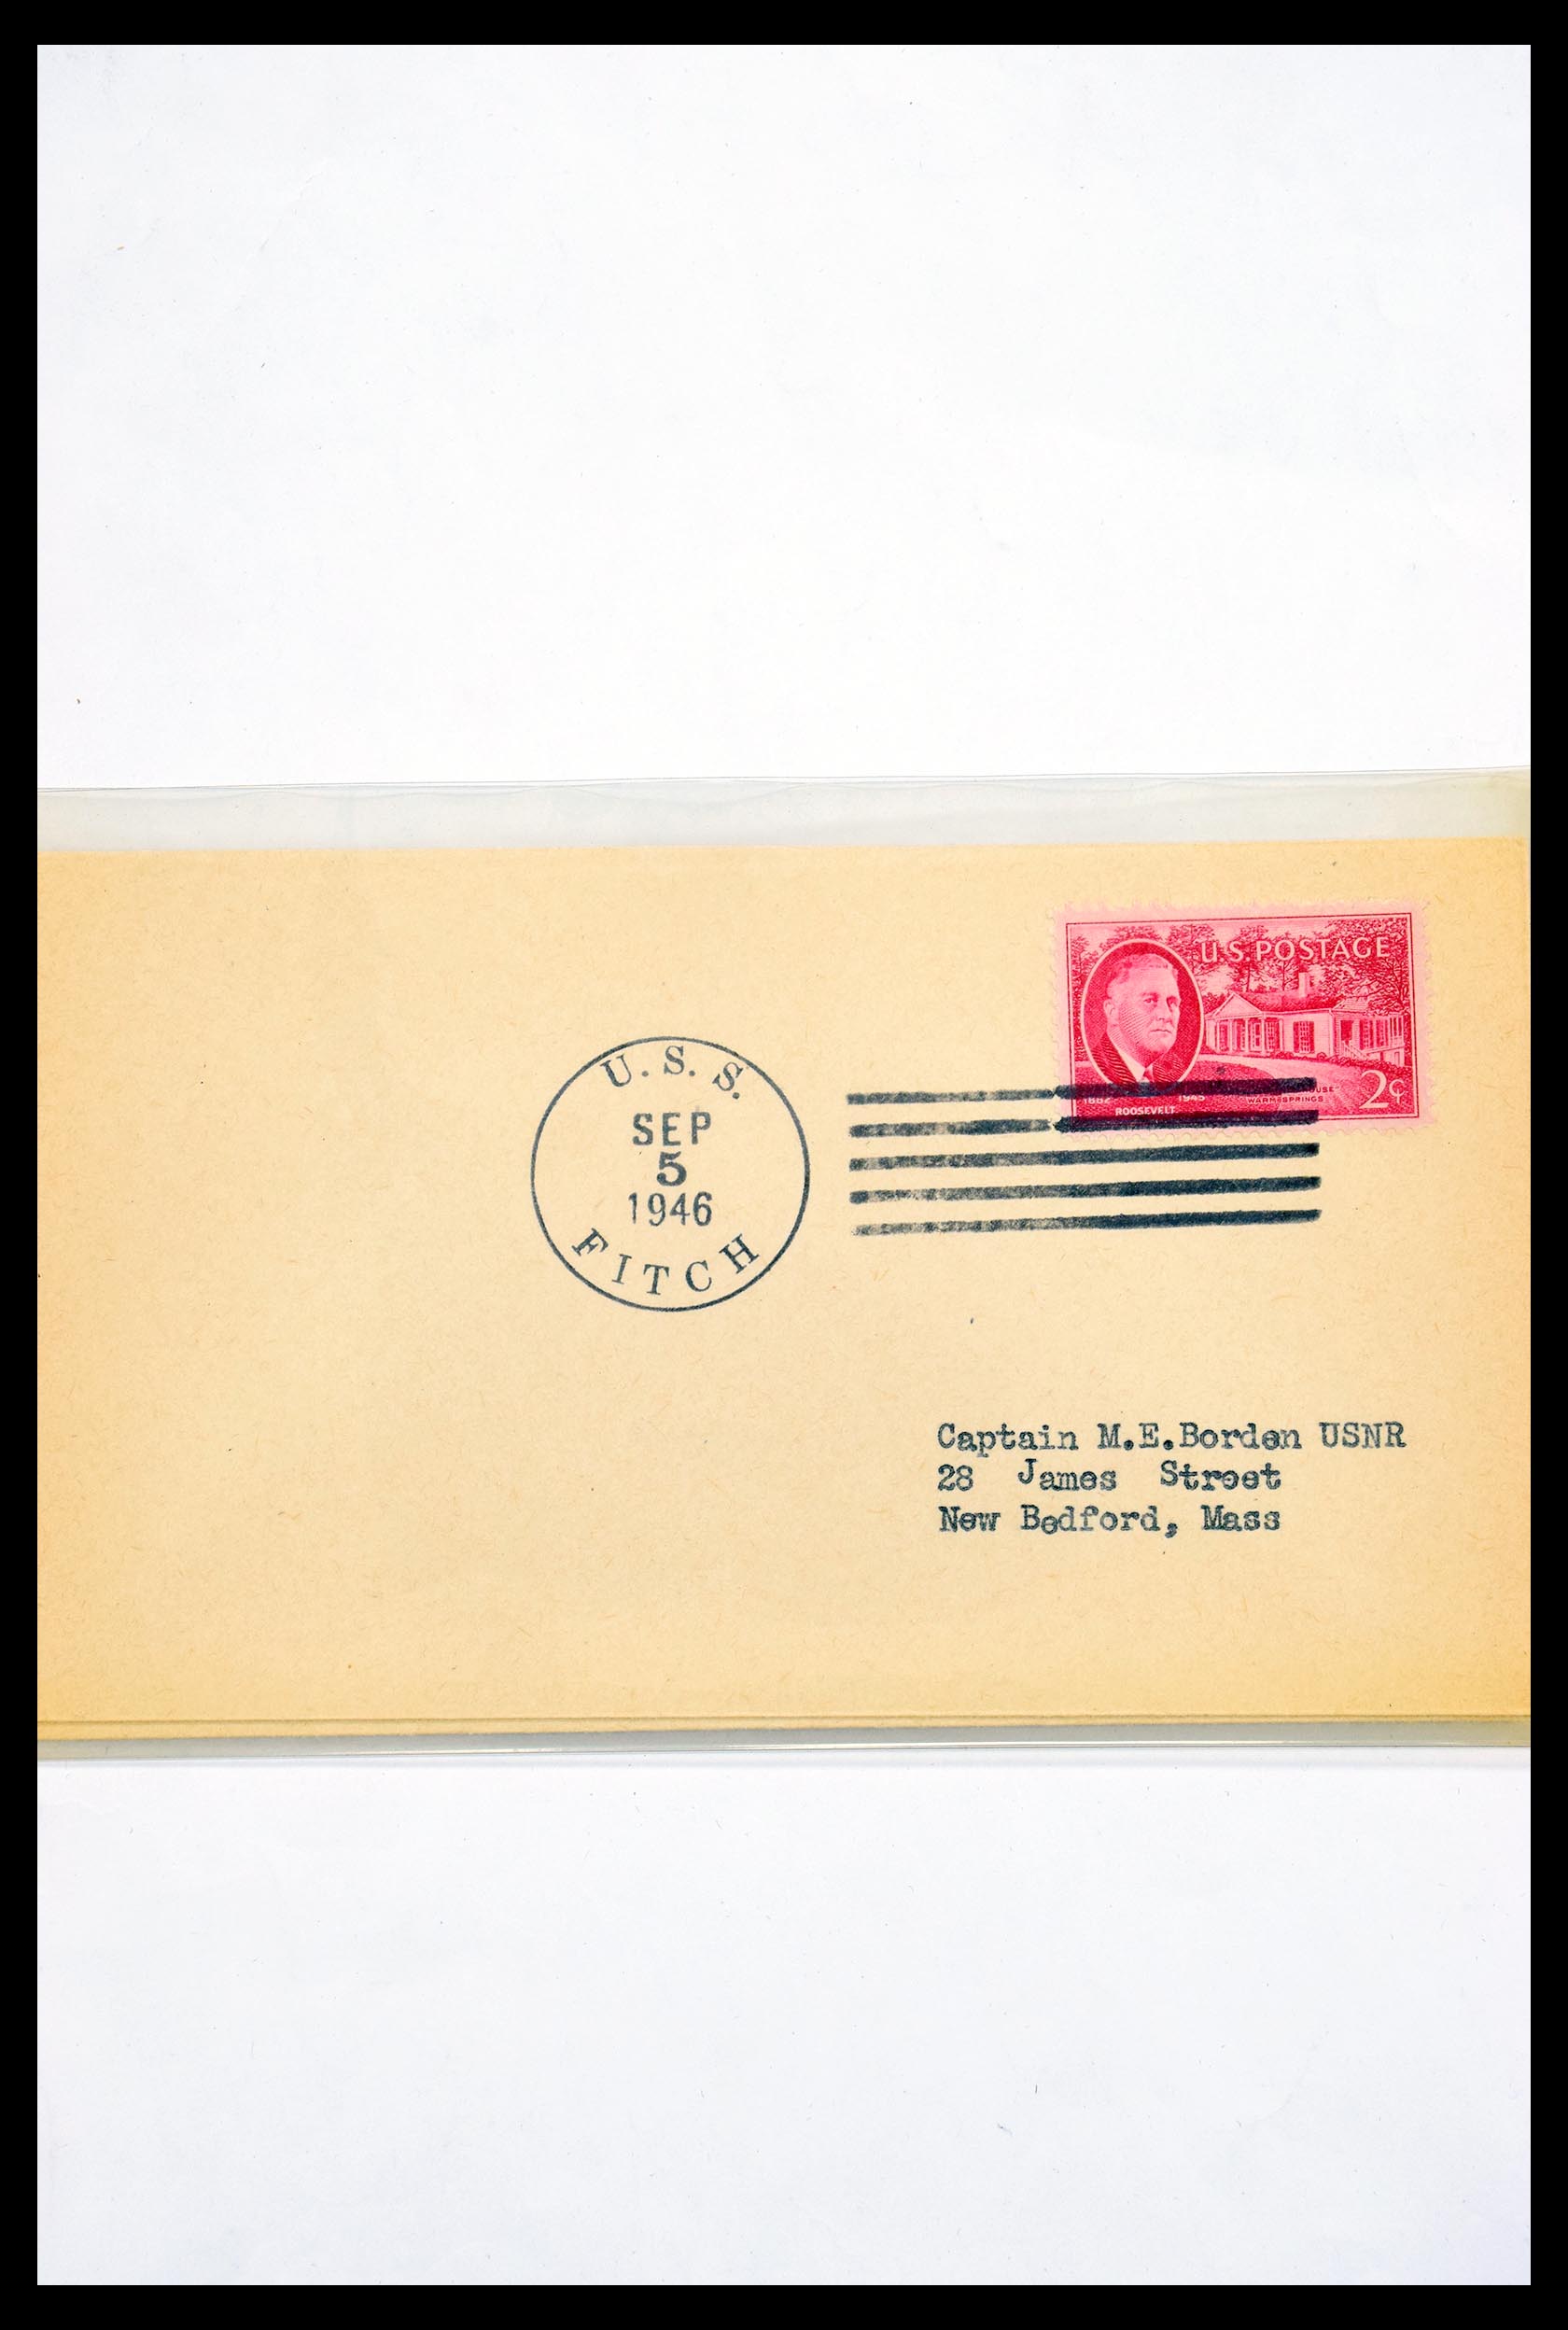 30341 314 - 30341 USA naval cover collection 1930-1970.